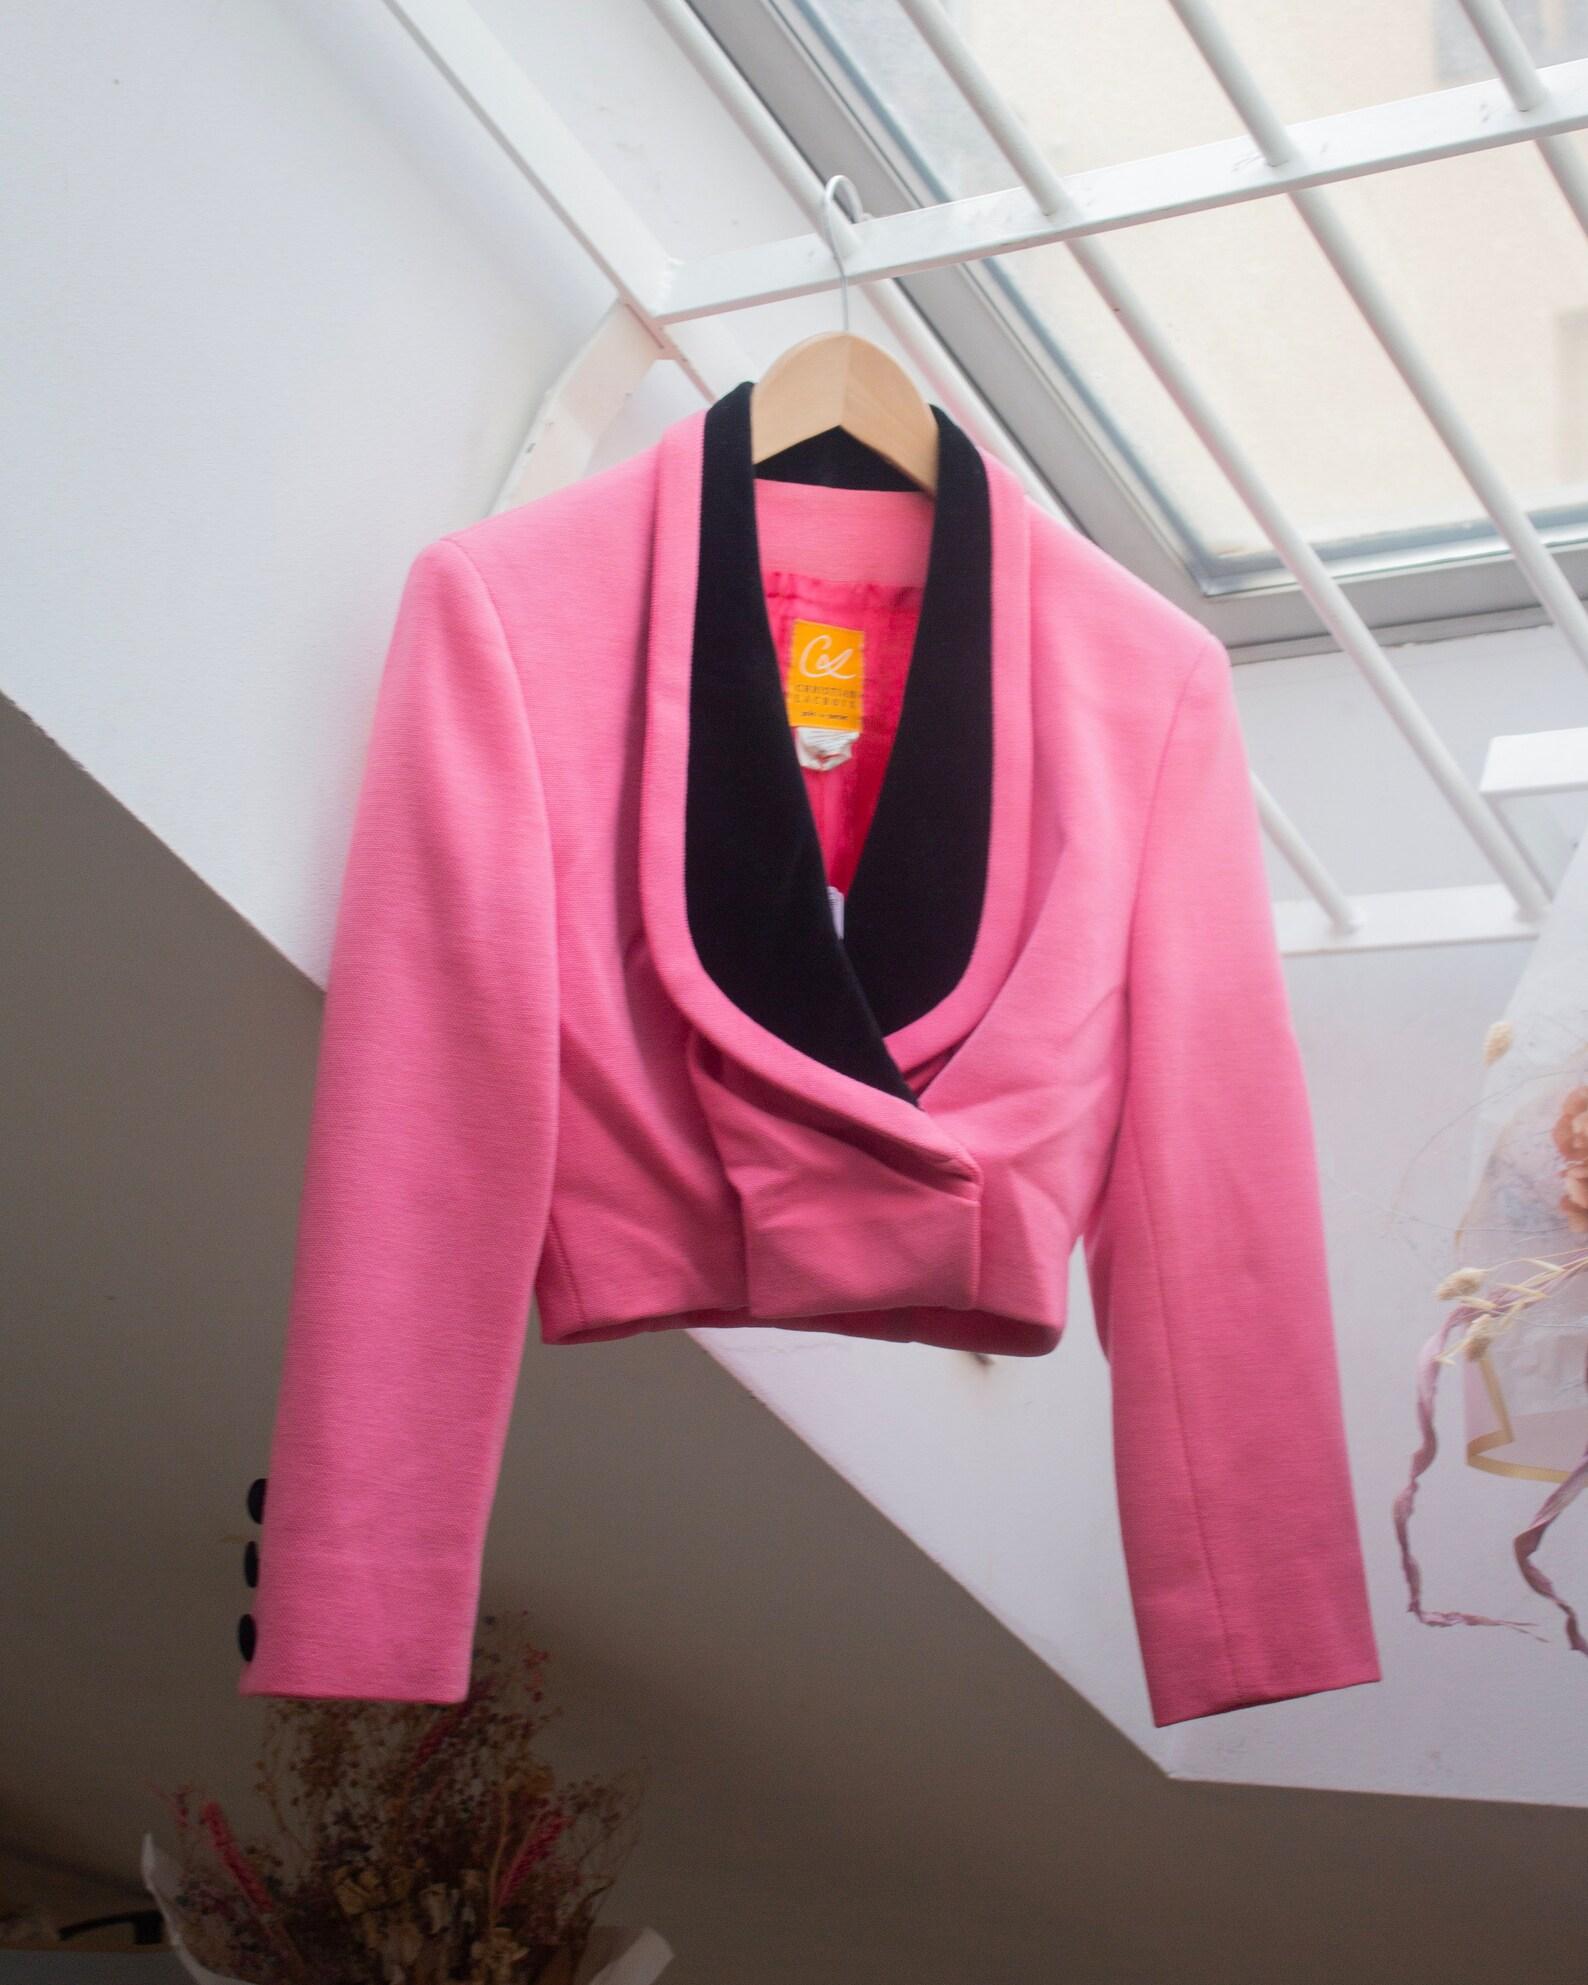 Christian Lacroix Prêt-a-porter early 90's shocking pink wool cropped bolero jacket with gathered front and oversize black velvet lapel (S)
Buttons closure (inside) and three velvet buttons on each cuff
Fully lined in cupro
100% wool 
Made in Italy